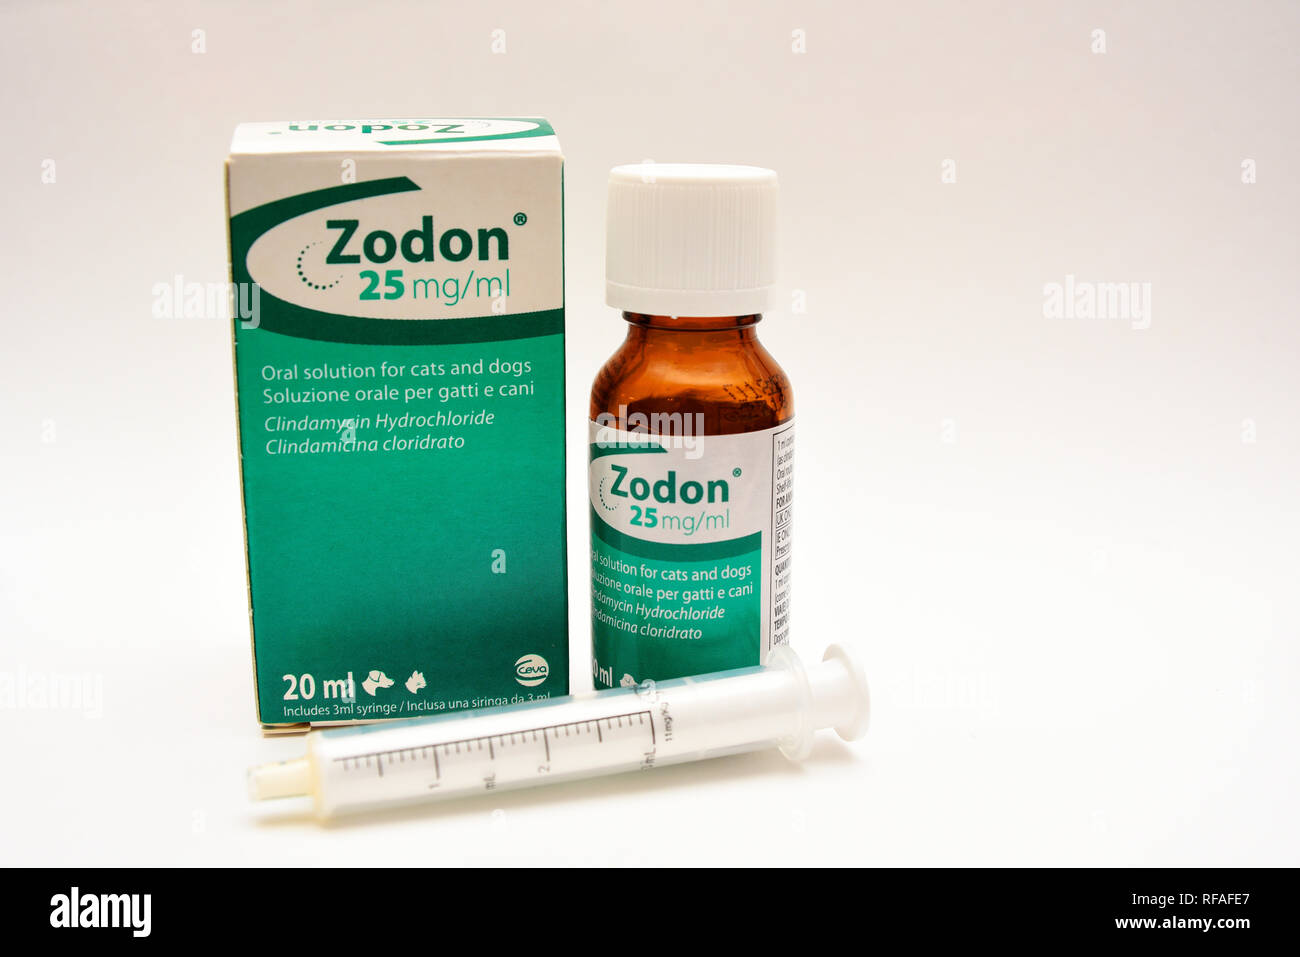 Zodon oral solution for pets infected wounds by Ceva, France based  manufacturer of veterinary products. Animal medical treatment for skin  ailments Stock Photo - Alamy